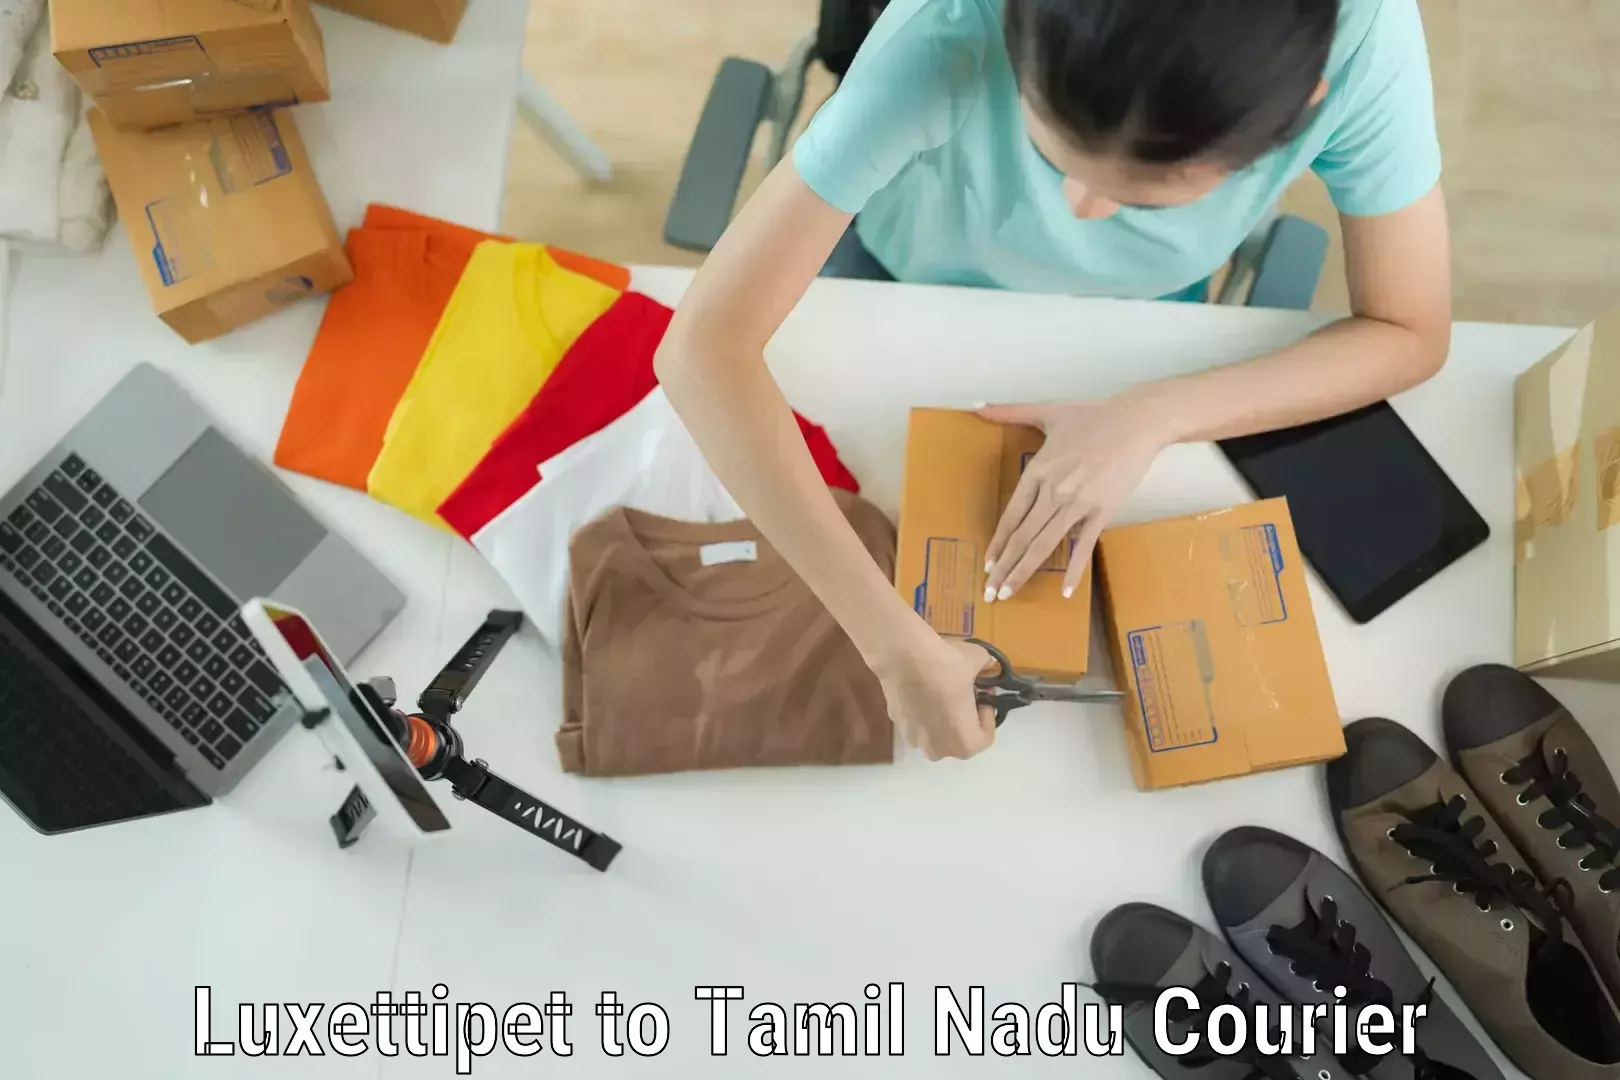 Same day baggage transport Luxettipet to Tamil Nadu